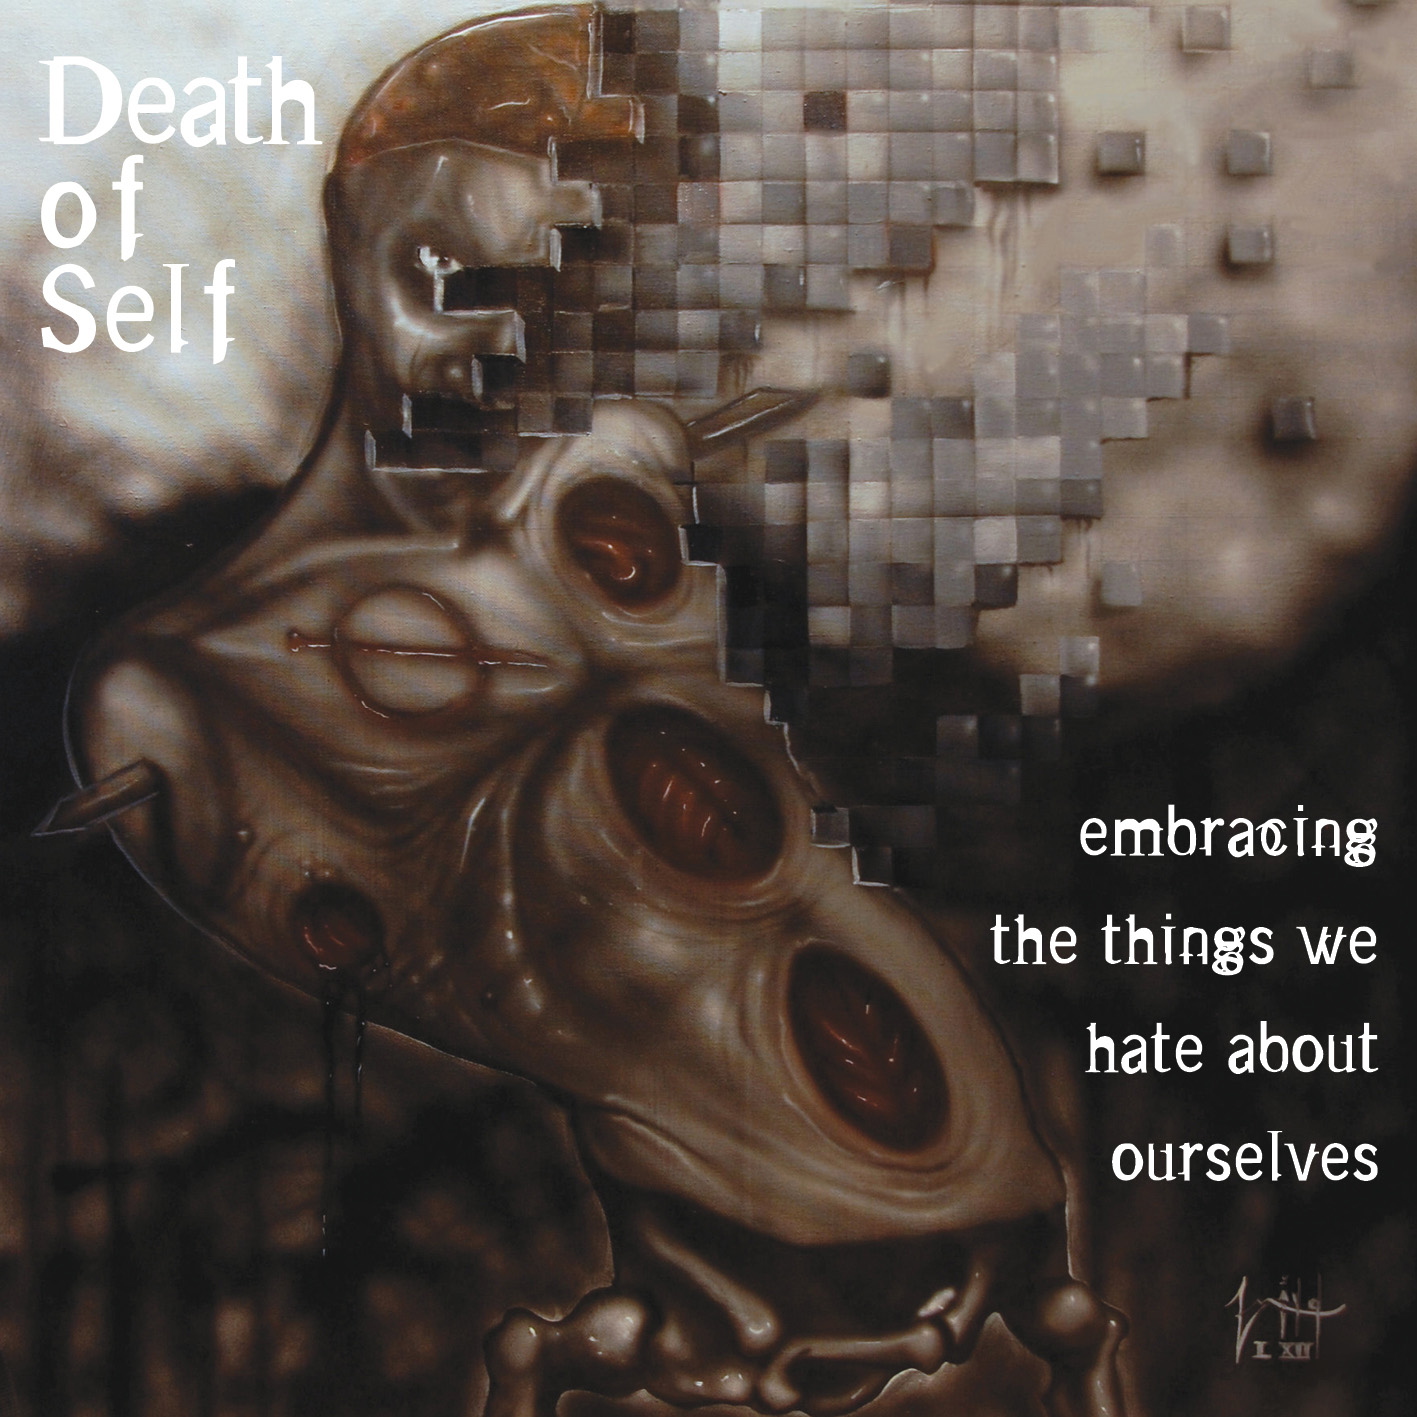 death of self - embracing the things we hate about ourselves